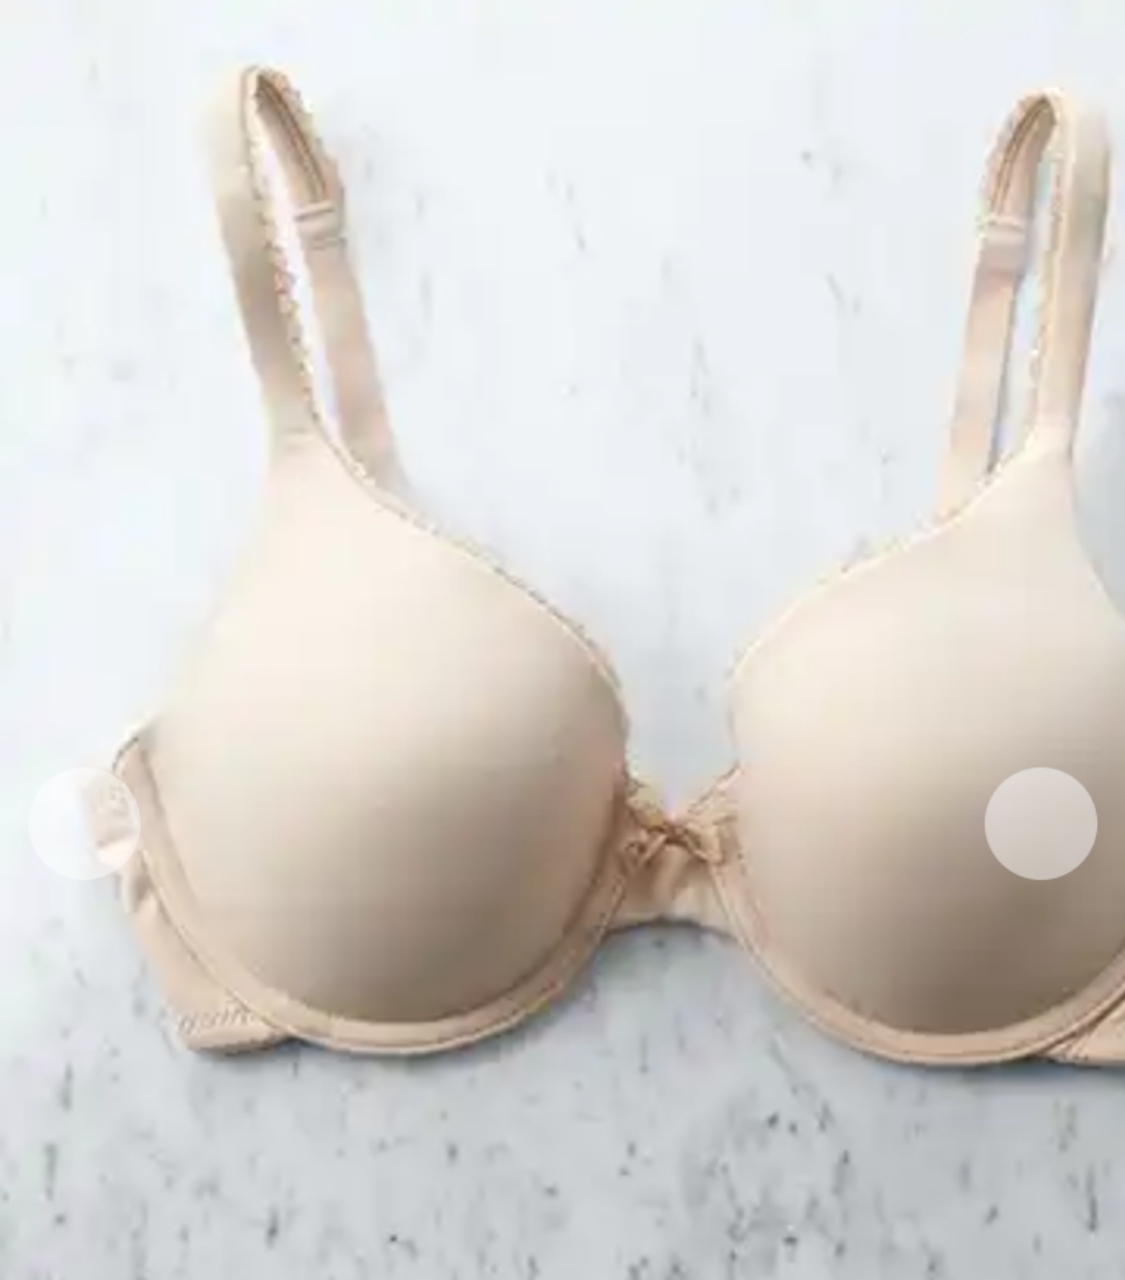 What Is The Biggest Bra Size